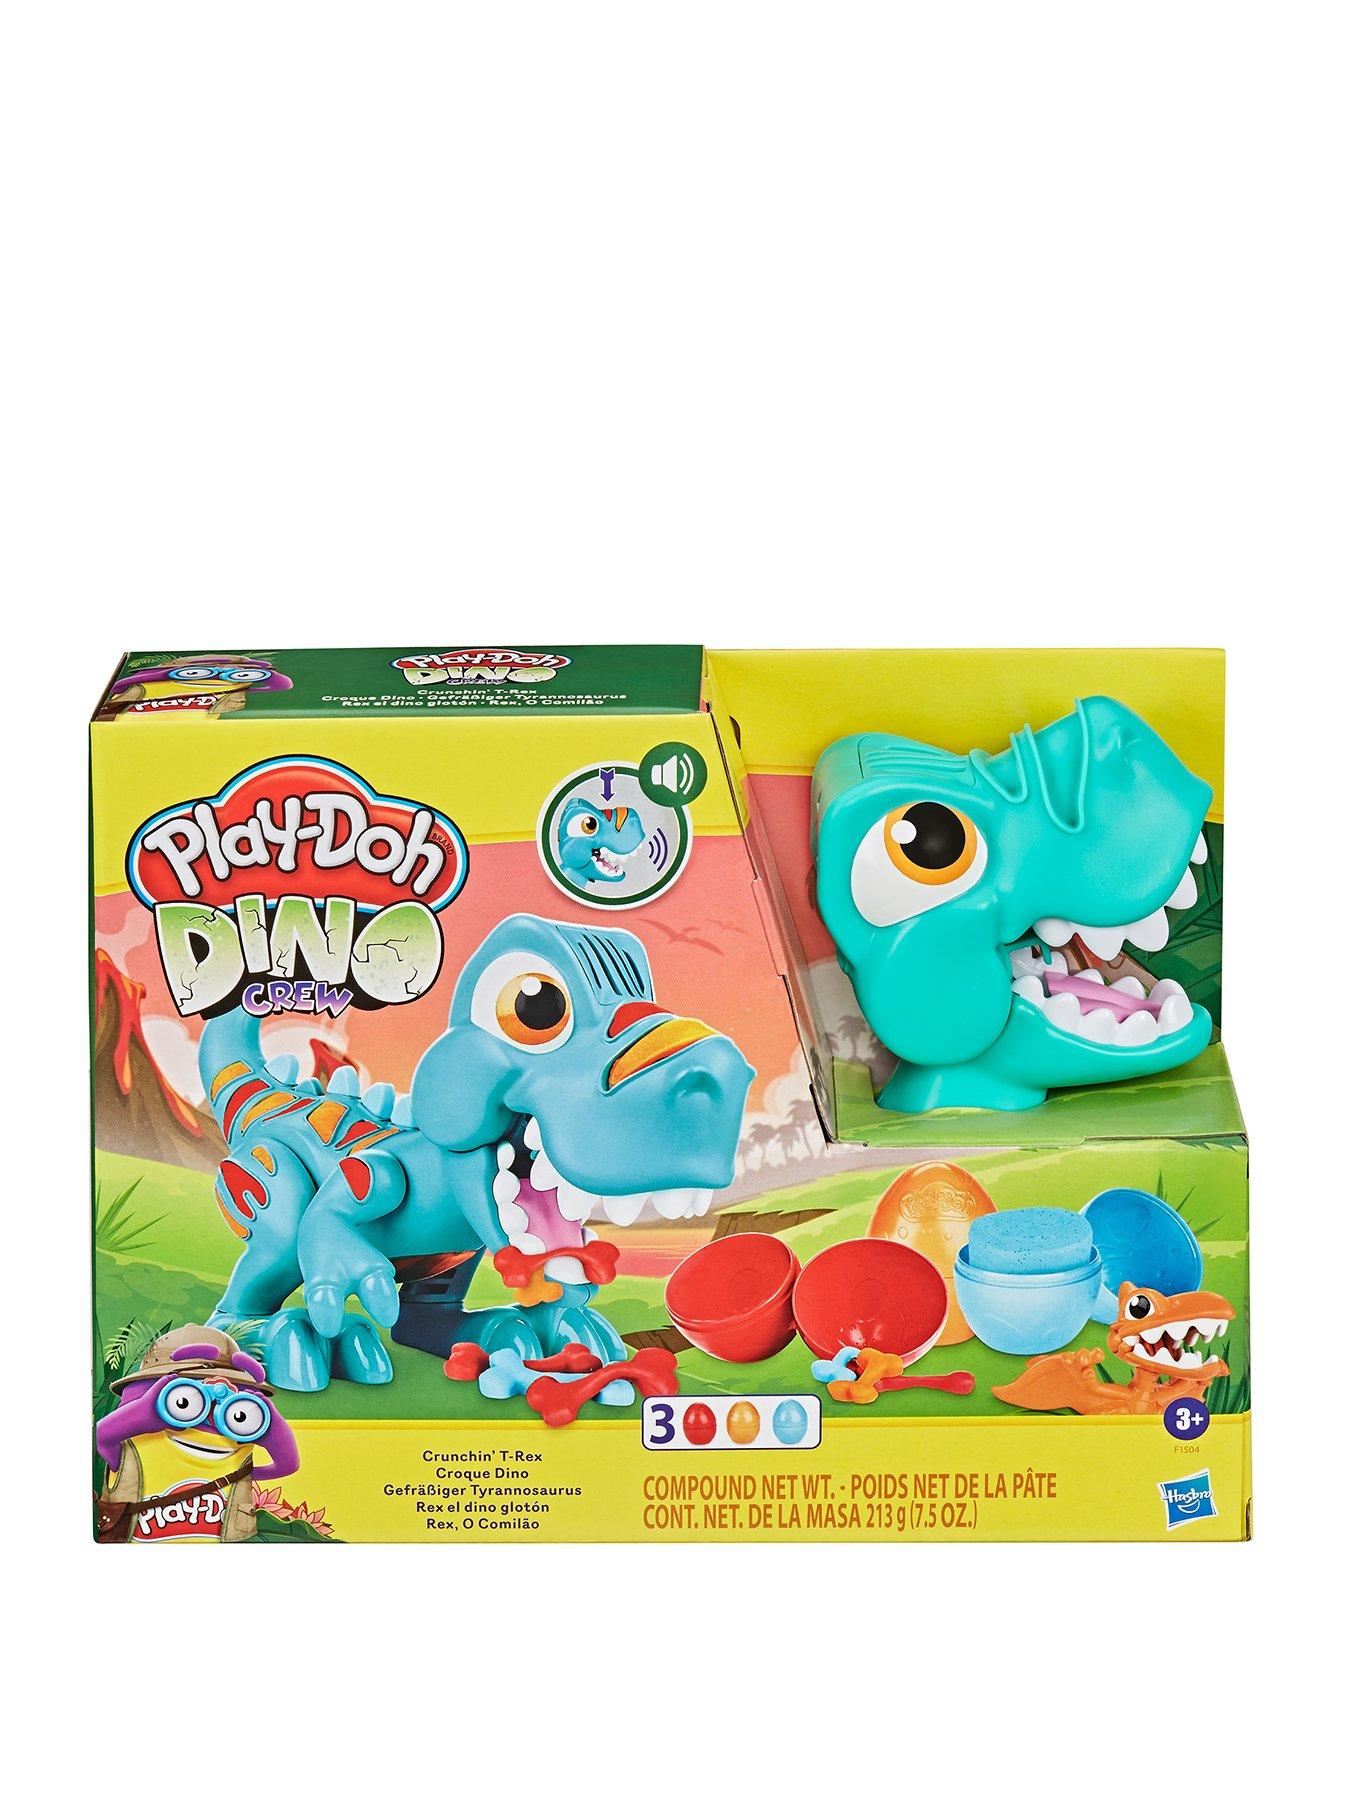 EXCLUSIVE: Play-Doh's Rolling Out The Cutest Pizza And Popcorn Playsets For  The Lil' Chefs In Your Life